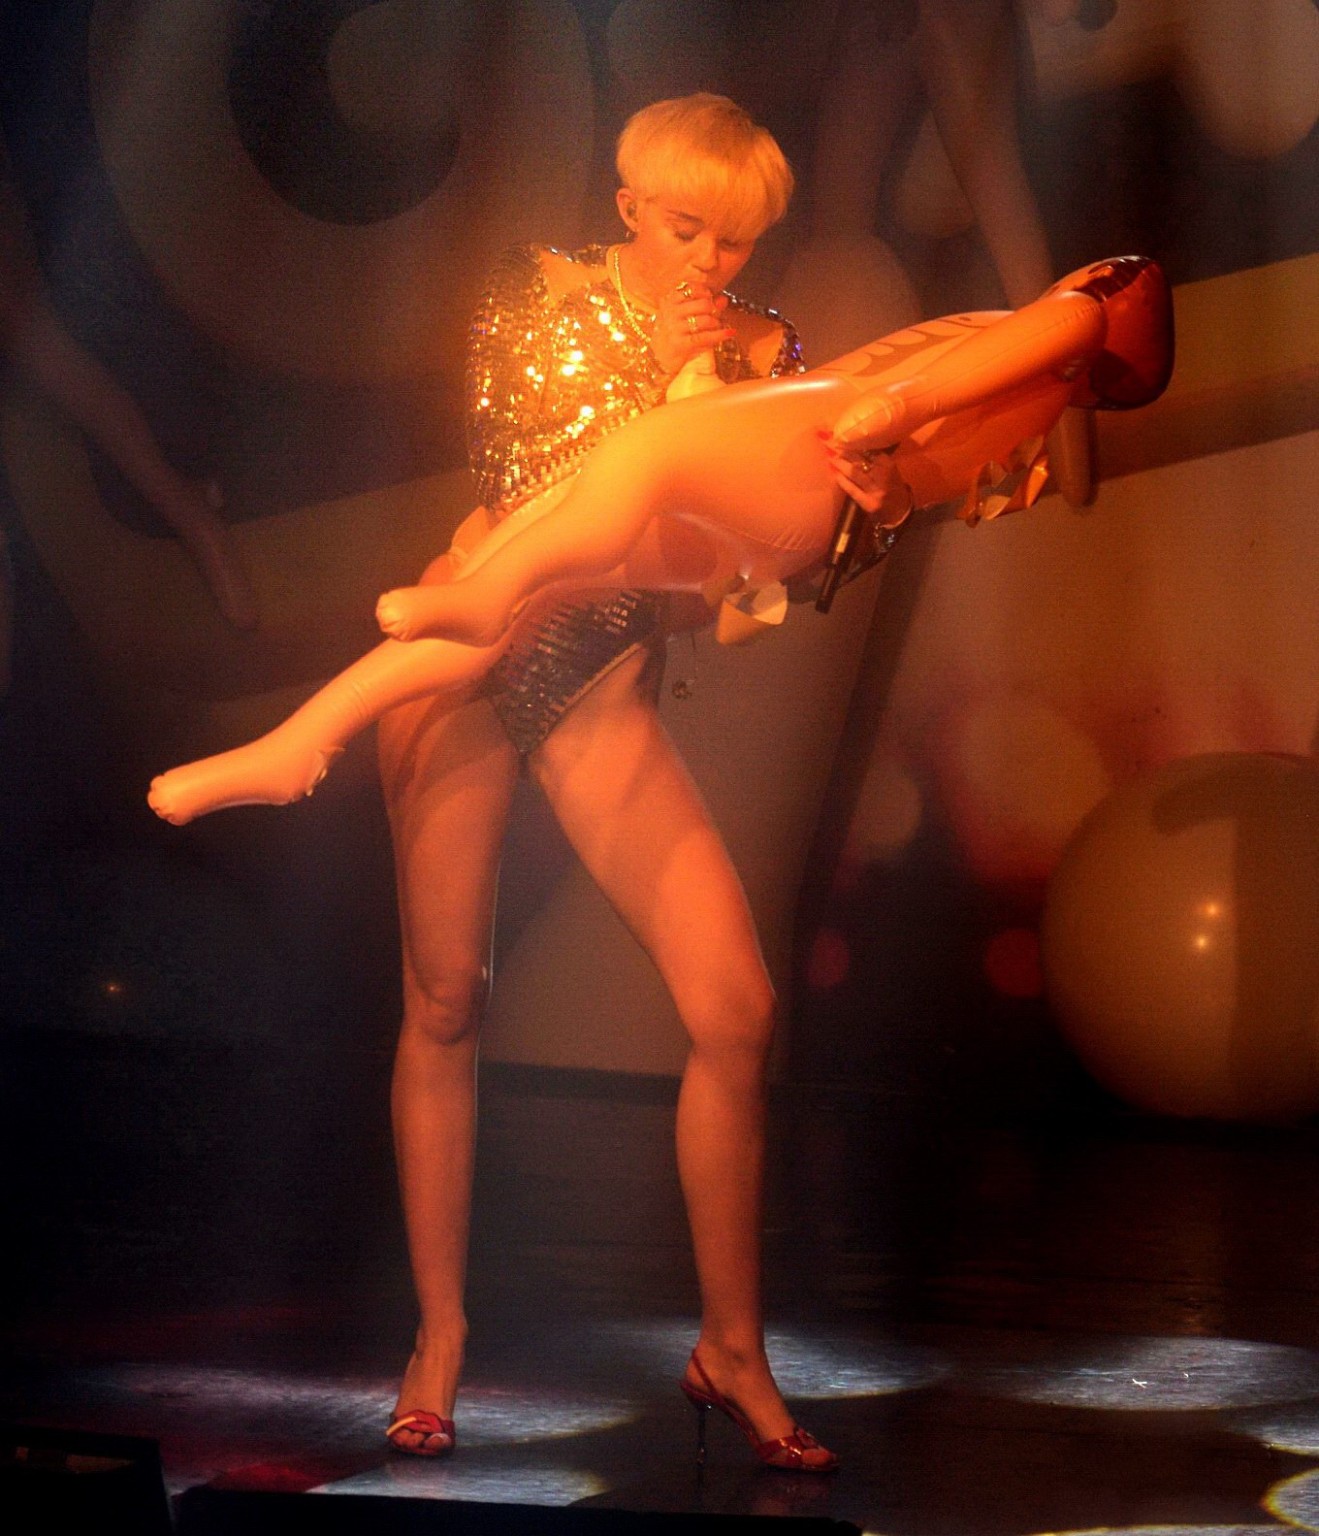 Miley Cyrus giving a blowjob to a blow up doll on stage at GAY Club in London #75197008